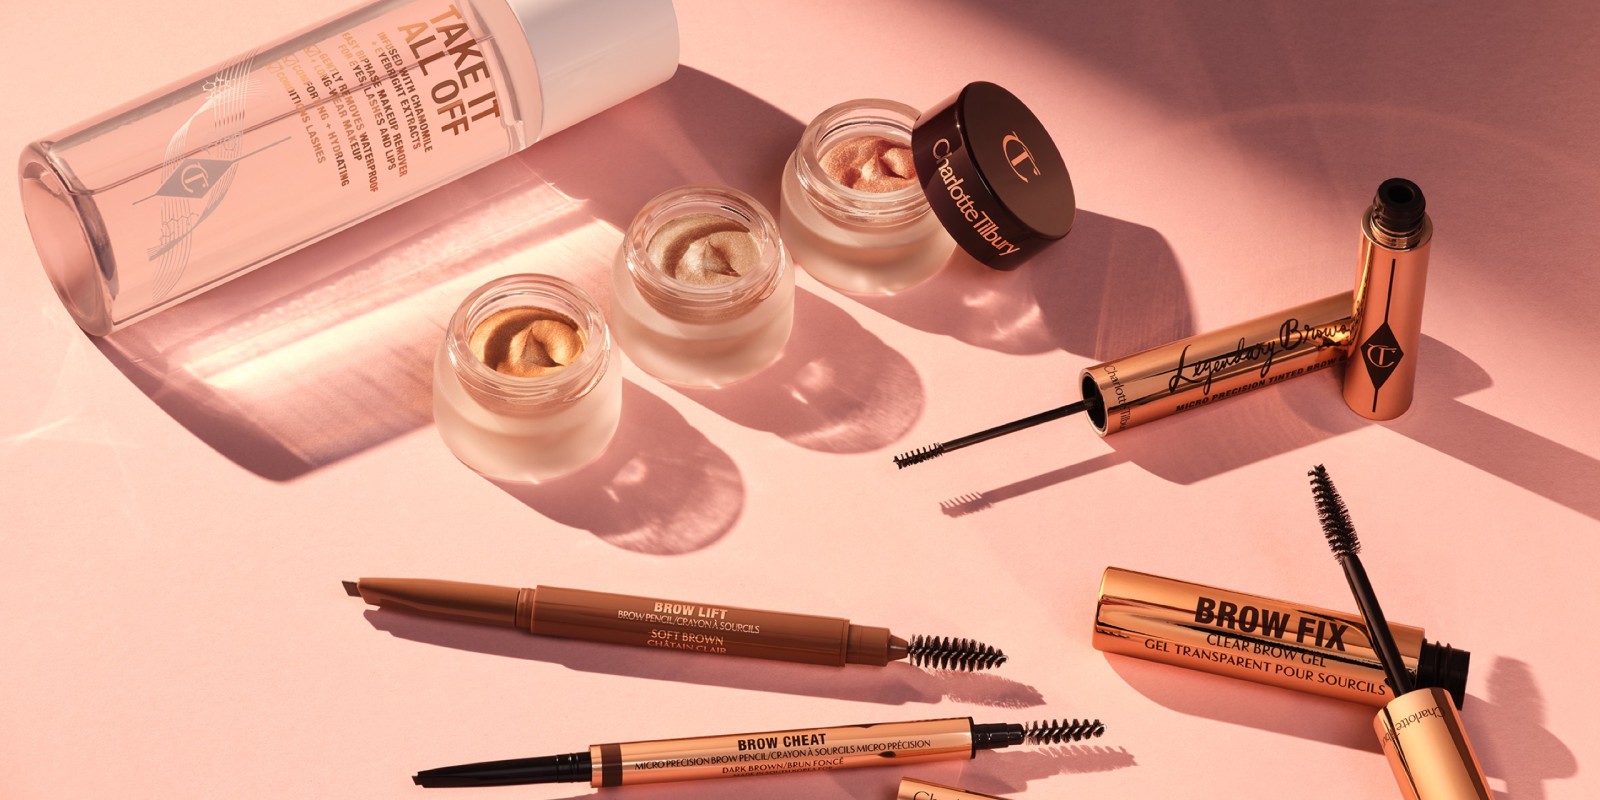 Trio of cream eyeshadows in shimmery shades of gold and pink in open pots with dark brown lids, eyebrow tints, eyebrow gels and brushes, mascara, and makeup remover in a large, clear bottle with a white-coloured cap.